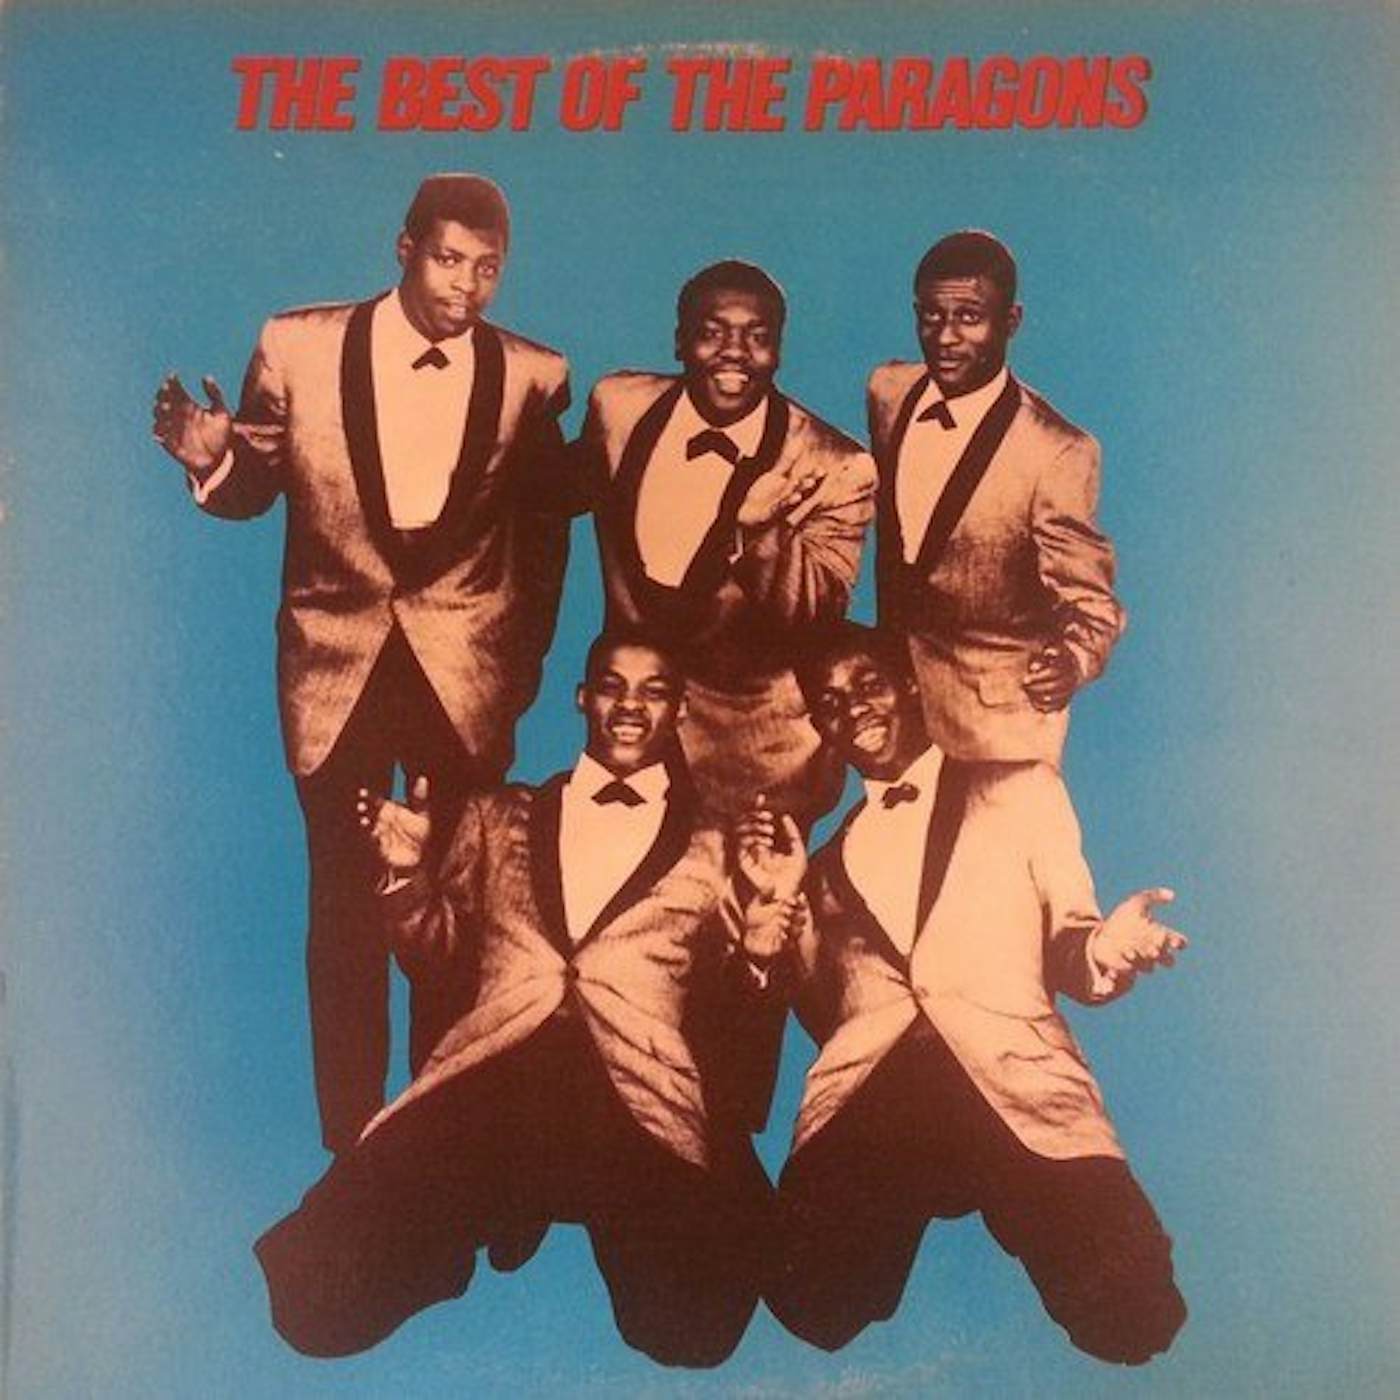 The Paragons BEST OF Vinyl Record